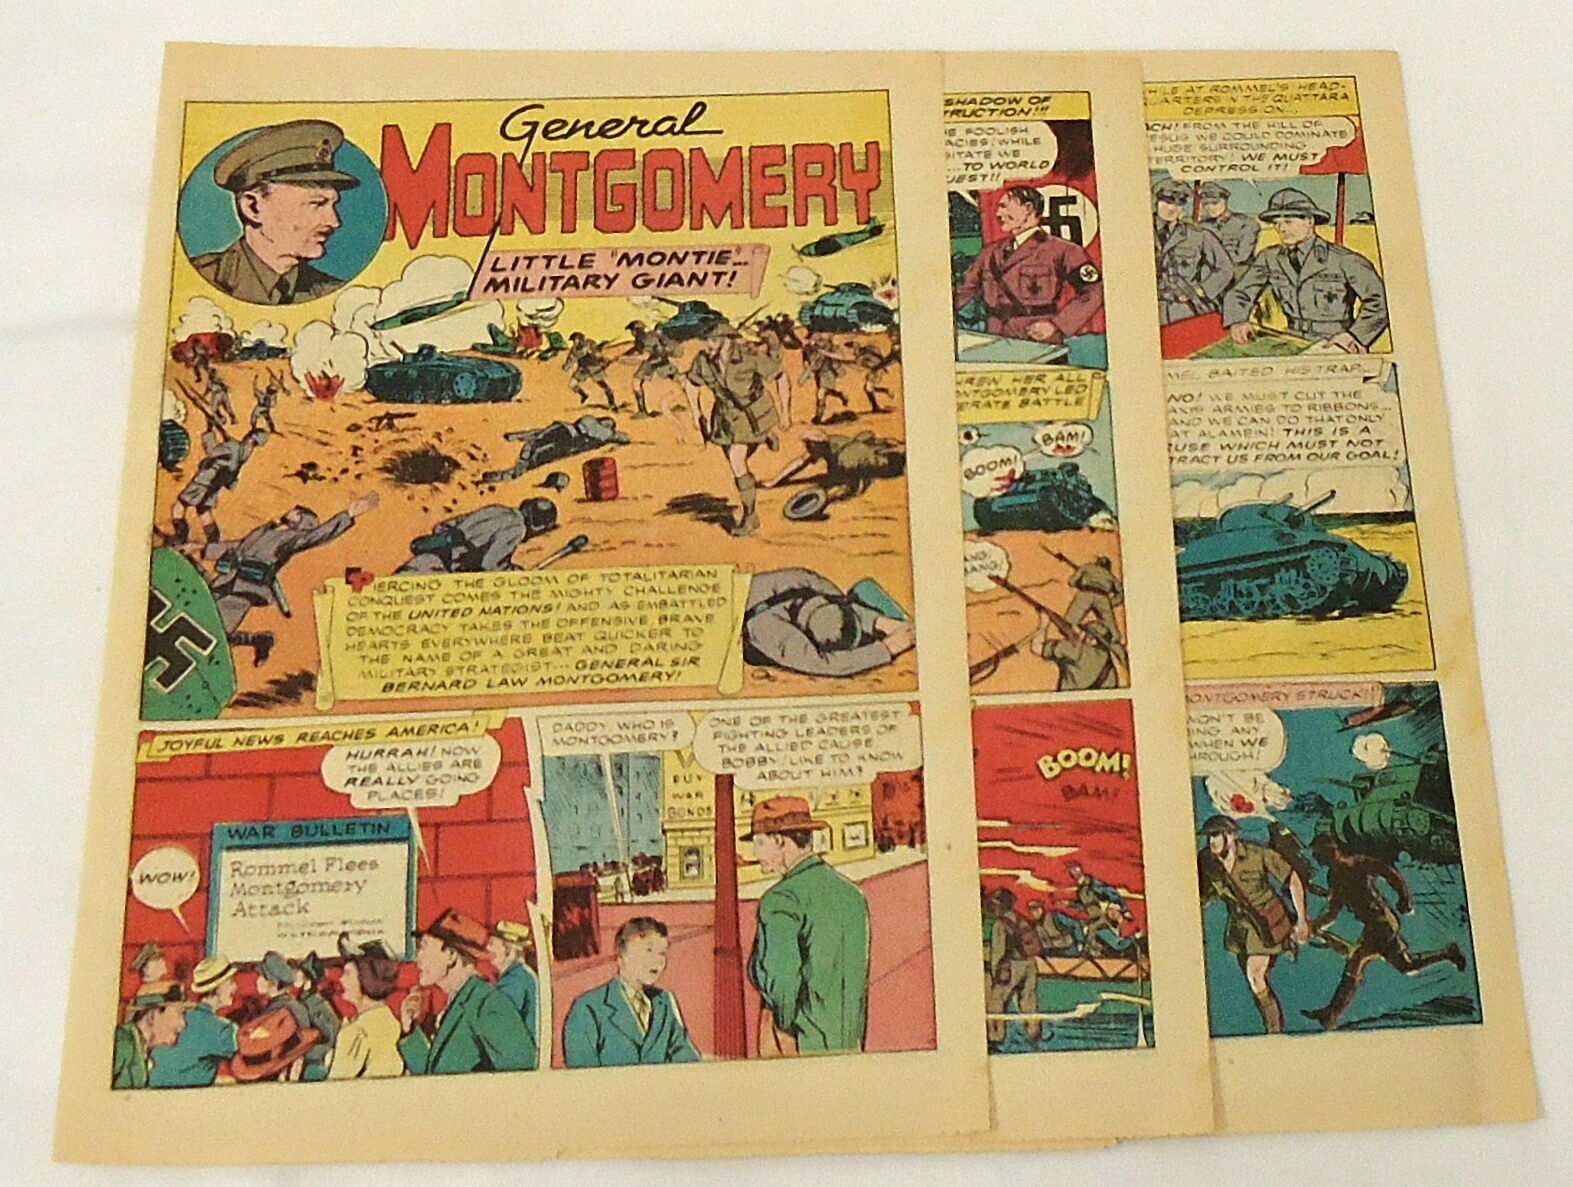 1943 six page cartoon story ~ GENERAL MONTGOMERY